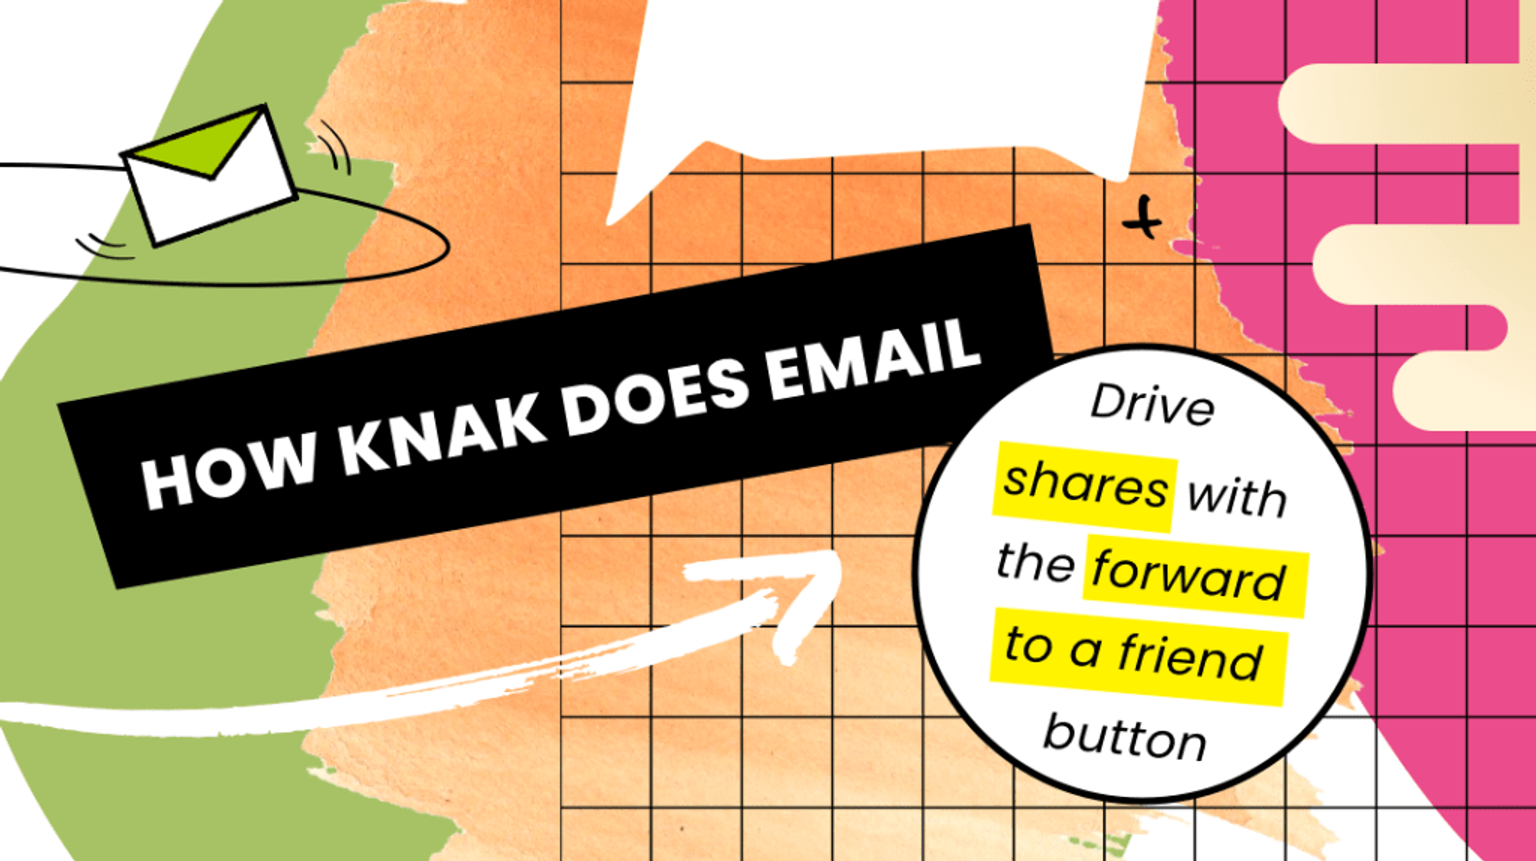 How Knak Does Email: Drive Email Shares with the “Forward to a Friend” Button